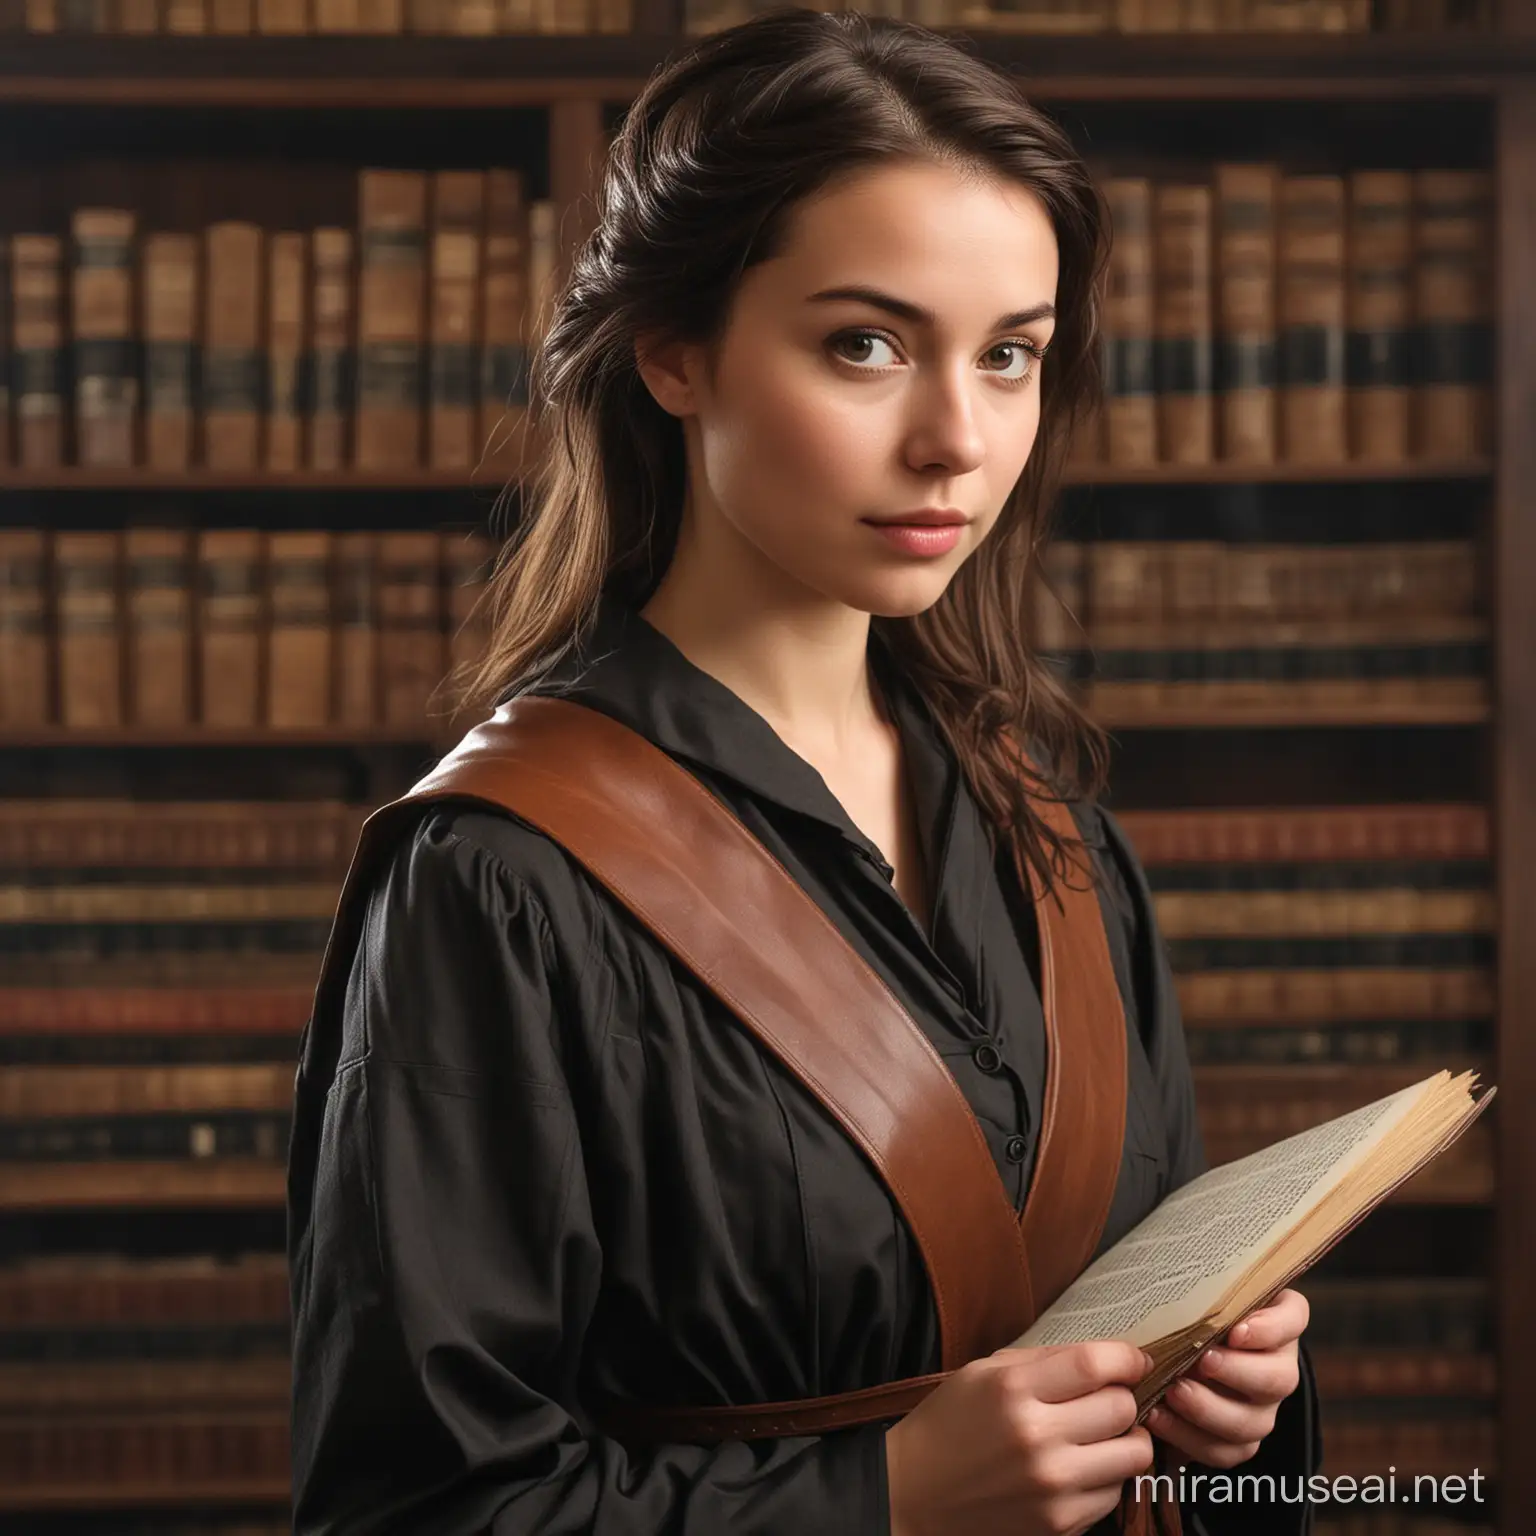 A portrait of a beautiful, mid-twenties, human female apprentice scholar. She has an intelligent and focused expression on her face, with a hint of curiosity in her eyes. Her hair is raven black and styled in a practical yet elegant manner that keeps it out of her face. She is dressed in simple scholar's robes, with a worn leather satchel slung over her shoulder. In her hands, she holds a large, open scroll filled with intricate writing and diagrams. The background should be a well-lit library or study room, with shelves overflowing with books and scrolls.